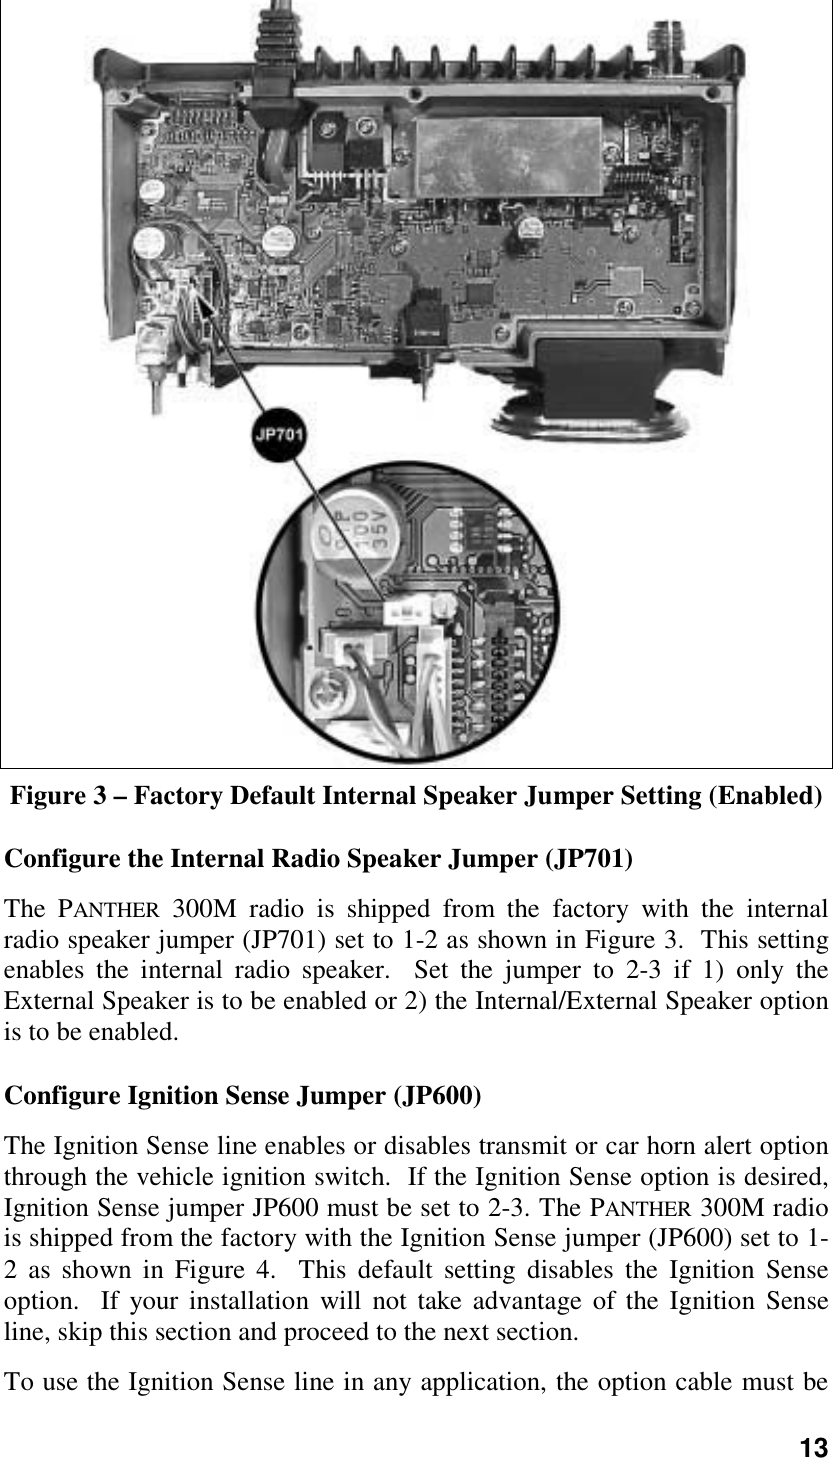 13Figure 3 – Factory Default Internal Speaker Jumper Setting (Enabled)Configure the Internal Radio Speaker Jumper (JP701)The PANTHER 300M radio is shipped from the factory with the internalradio speaker jumper (JP701) set to 1-2 as shown in Figure 3.  This settingenables the internal radio speaker.  Set the jumper to 2-3 if 1) only theExternal Speaker is to be enabled or 2) the Internal/External Speaker optionis to be enabled.Configure Ignition Sense Jumper (JP600)The Ignition Sense line enables or disables transmit or car horn alert optionthrough the vehicle ignition switch.  If the Ignition Sense option is desired,Ignition Sense jumper JP600 must be set to 2-3. The PANTHER 300M radiois shipped from the factory with the Ignition Sense jumper (JP600) set to 1-2 as shown in Figure 4.  This default setting disables the Ignition Senseoption.  If your installation will not take advantage of the Ignition Senseline, skip this section and proceed to the next section.To use the Ignition Sense line in any application, the option cable must be